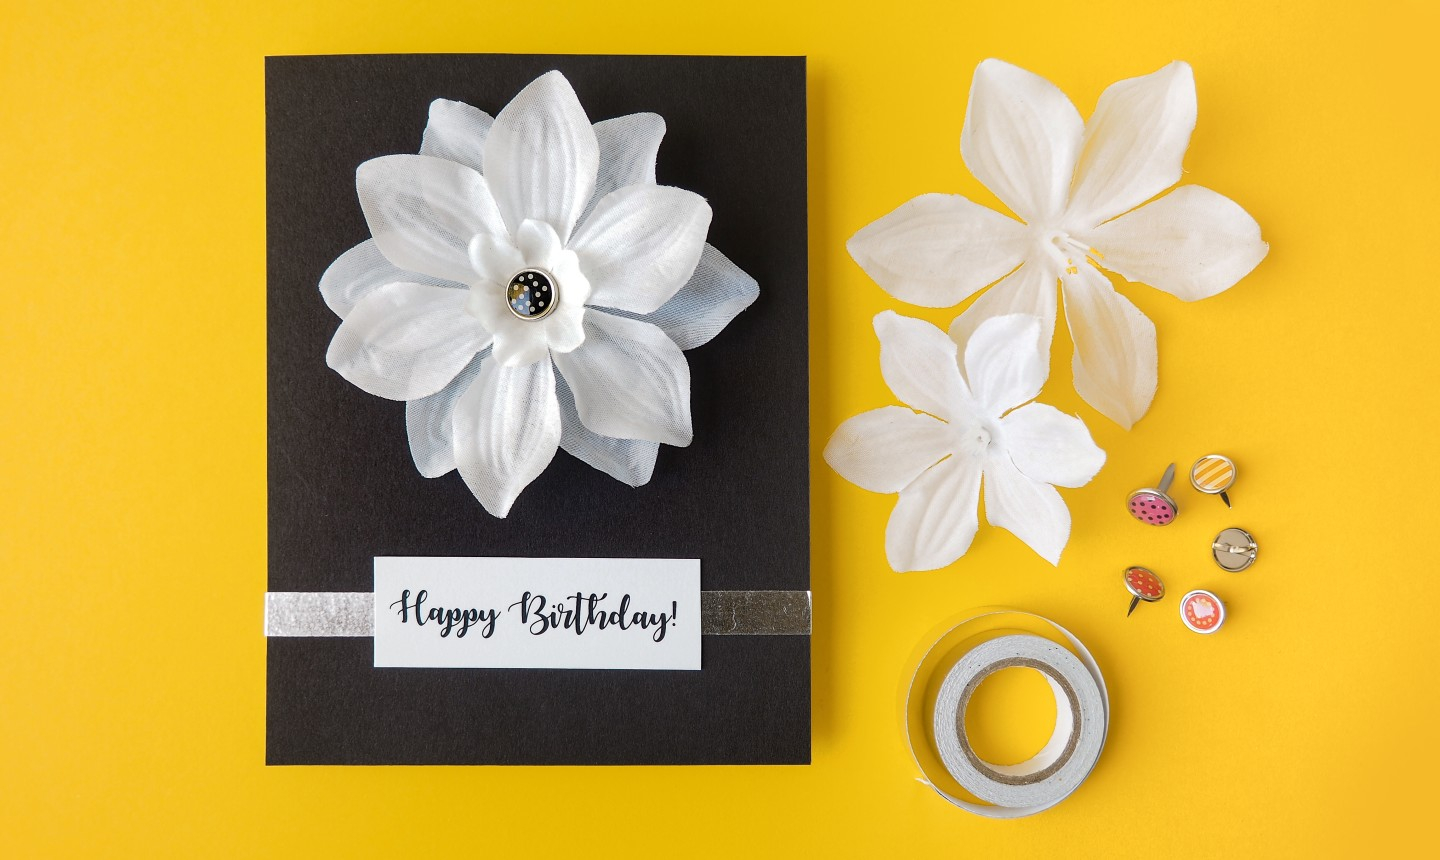 Embossed Birthday Card Ideas 13 Easy Card Making Ideas That Take 30 Minutes Or Less